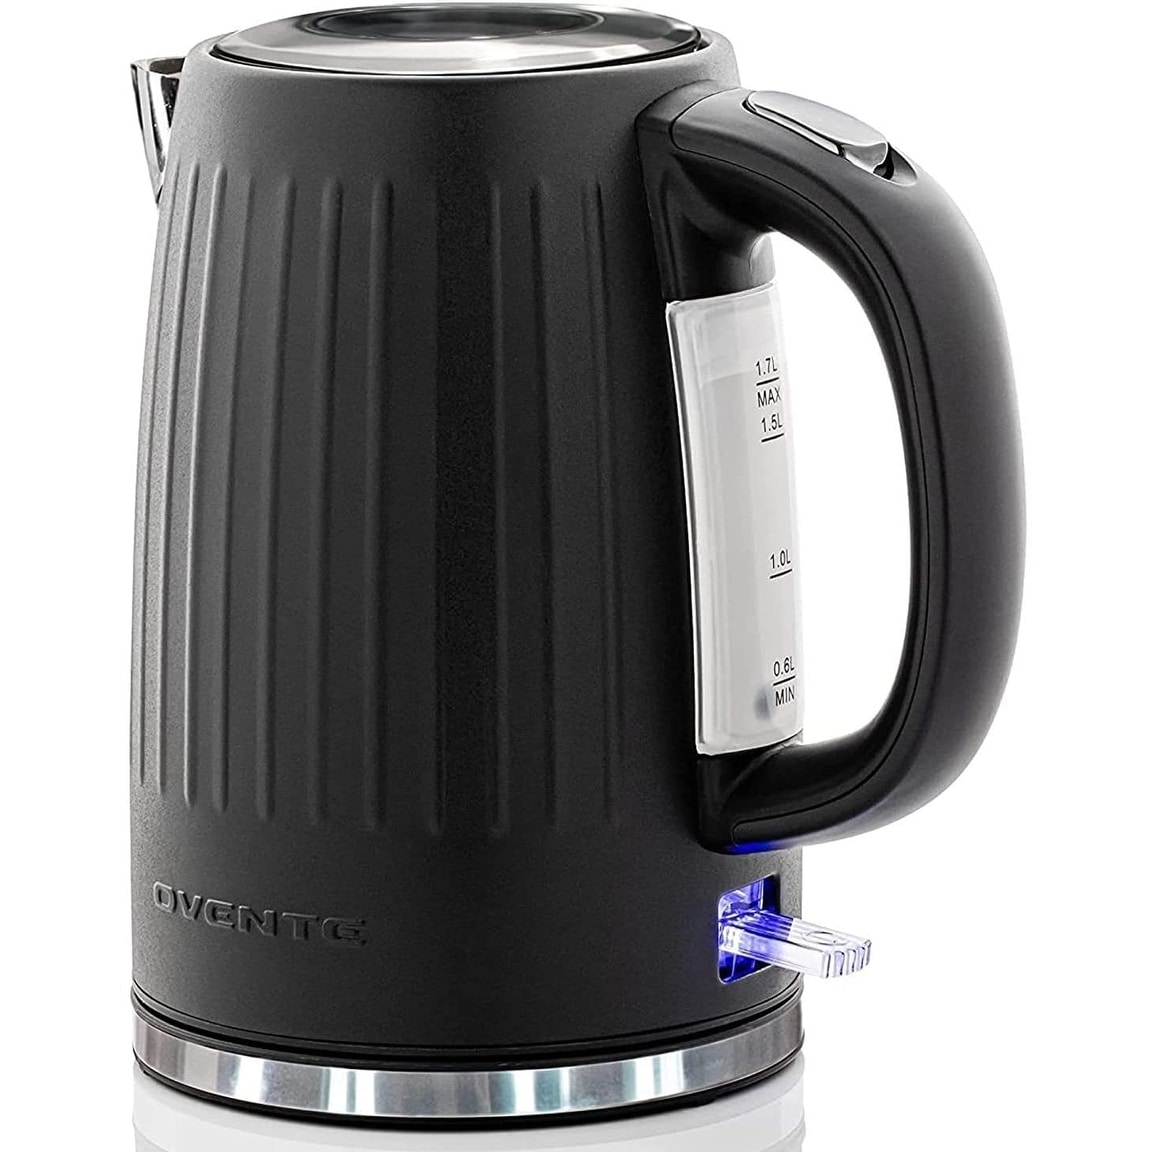 https://ak1.ostkcdn.com/images/products/is/images/direct/4a5fc0fa95e43fdfed1025a0428fc84d2273592d/Ovente-Electric-Kettle-1.7-Liter-1750-Watts-Hot-Water-Boiler-with-Auto-Shutoff-%26-Boil-Dry-Protection-Tech%2C-KS711-Series.jpg